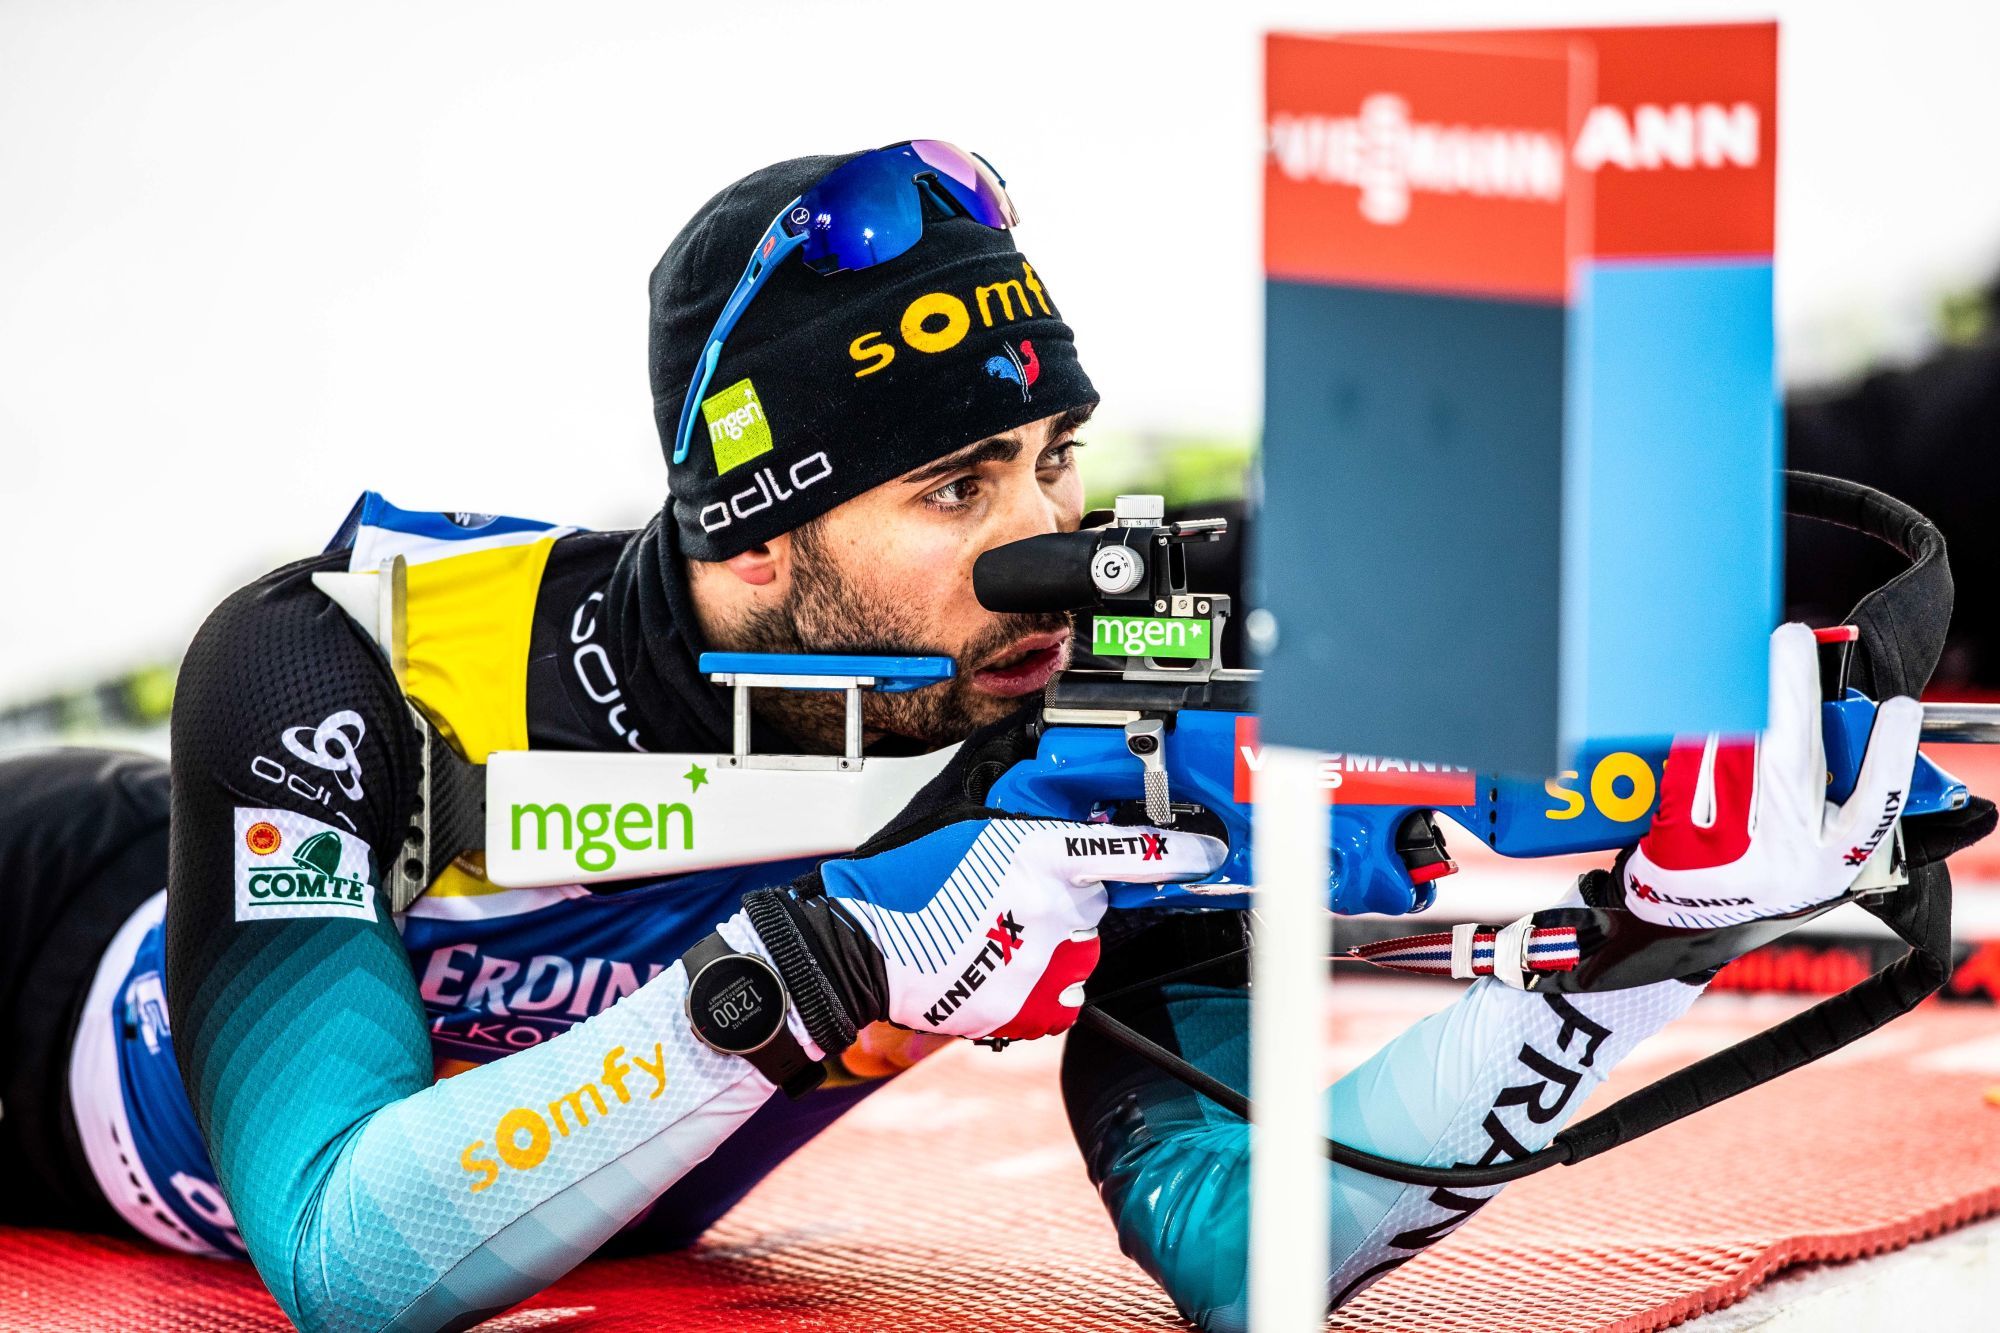 191201 Martin Fourcade of France competes in the Men's 10km Sprint during the IBU World Cup Biathlon on December 01, 2019 in Östersund.
Photo: Johan Axelsson / BILDBYRÅN / Cop 245 

Photo by Icon Sport - Ostersund (Suede)